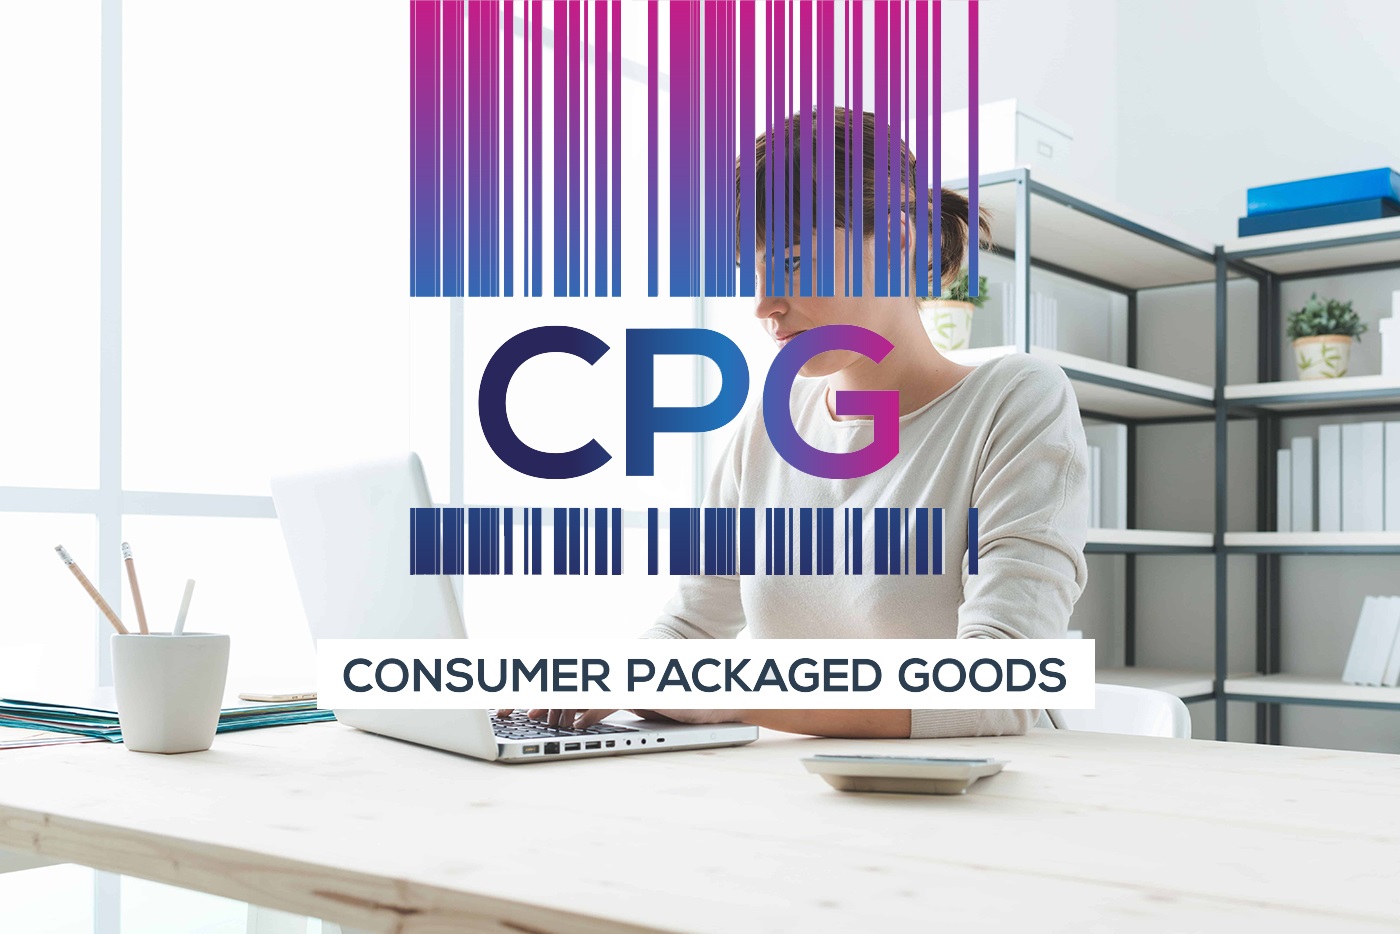 investir site ecommerce cpg biens grande consommation